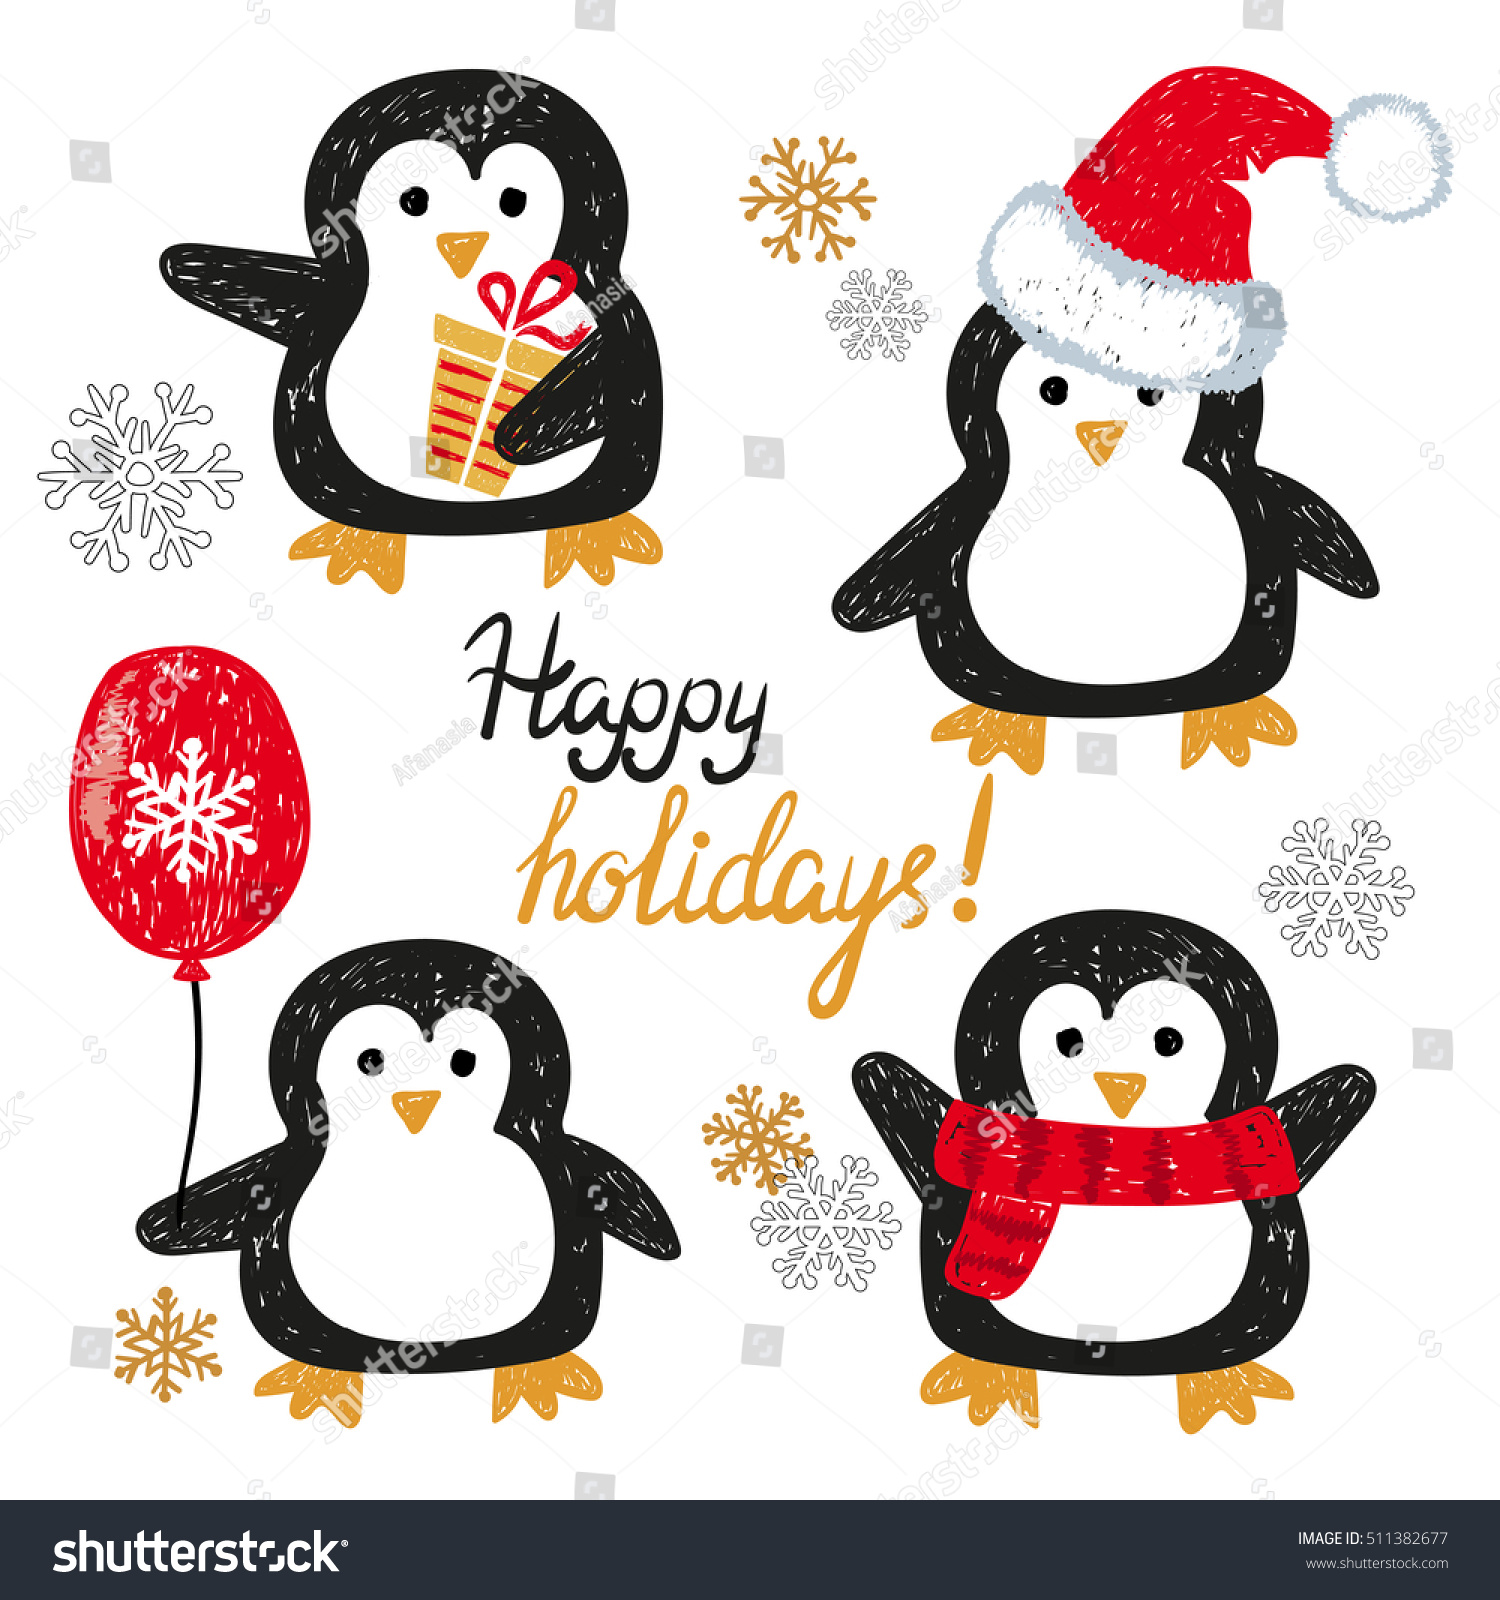 Merry Christmas greetings Vector holiday characters